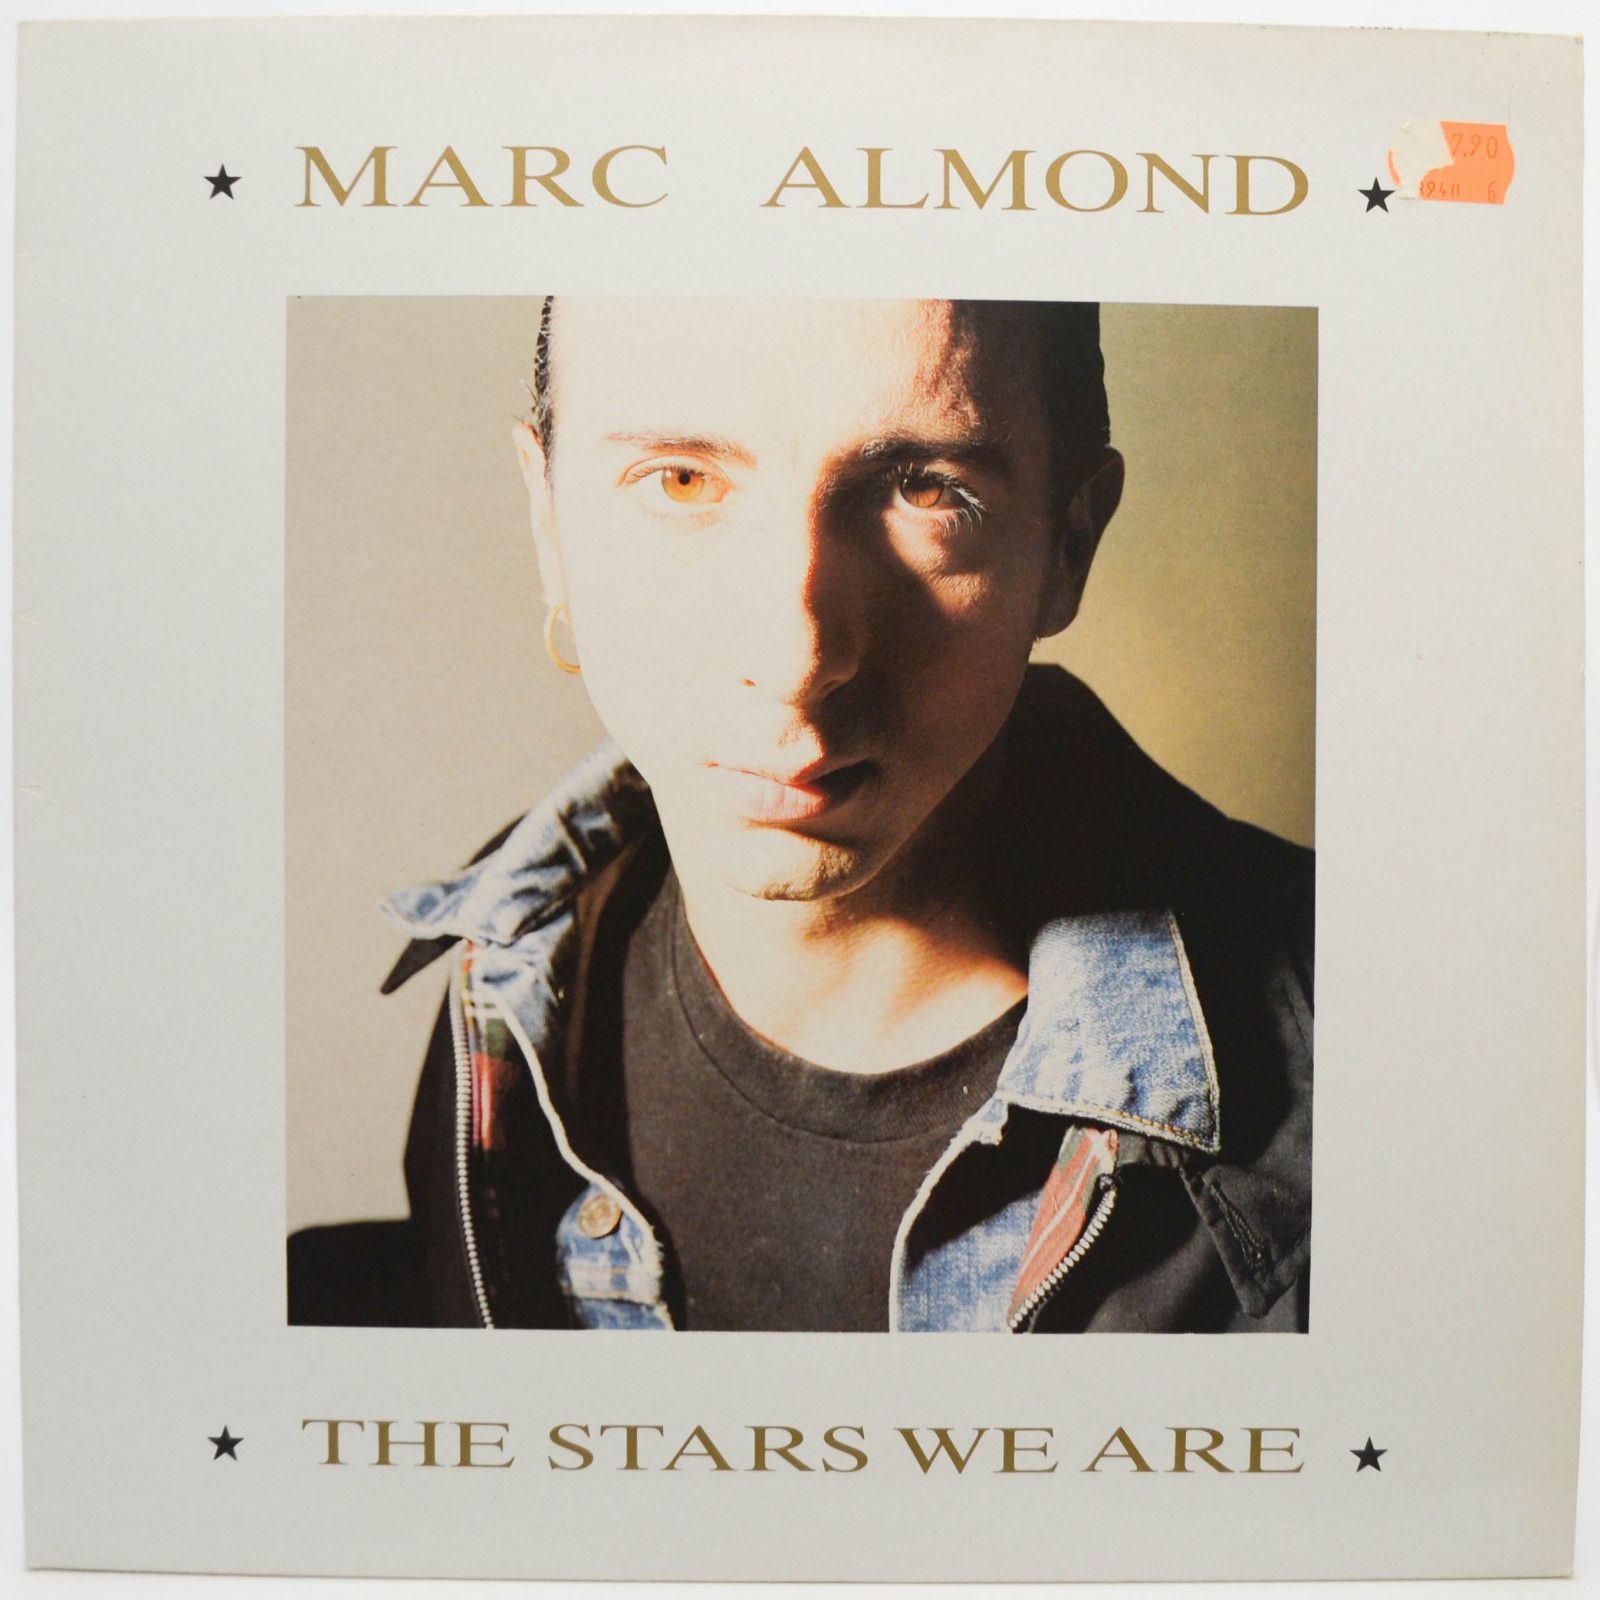 Marc Almond — The Stars We Are, 1988